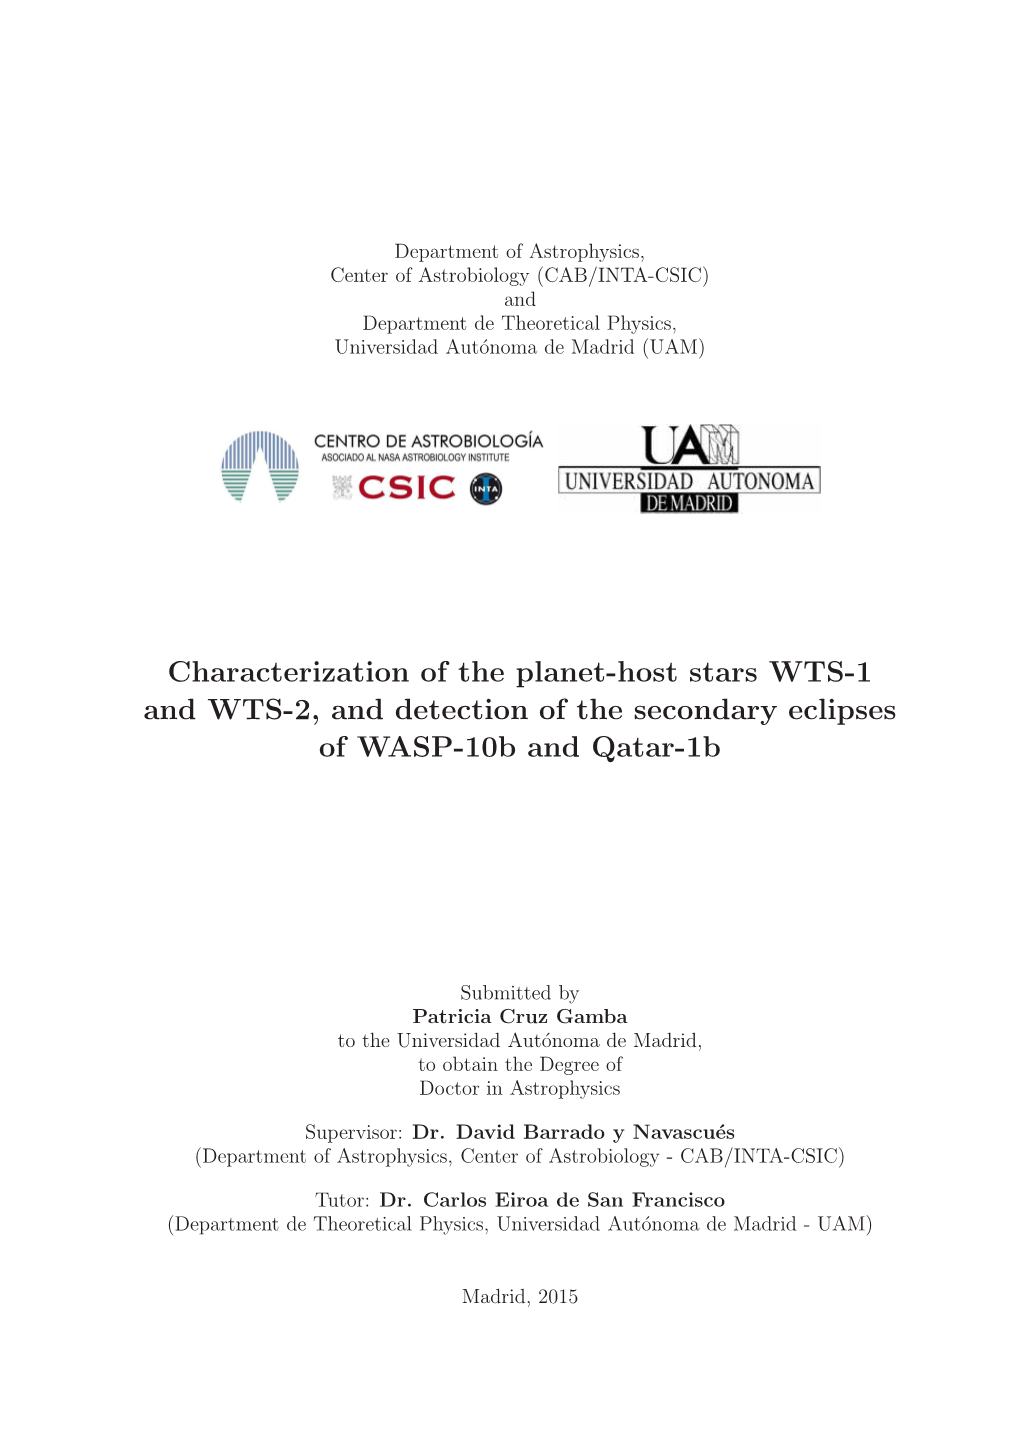 Characterization of the Planet-Host Stars WTS-1 and WTS-2, and Detection of the Secondary Eclipses of WASP-10B and Qatar-1B